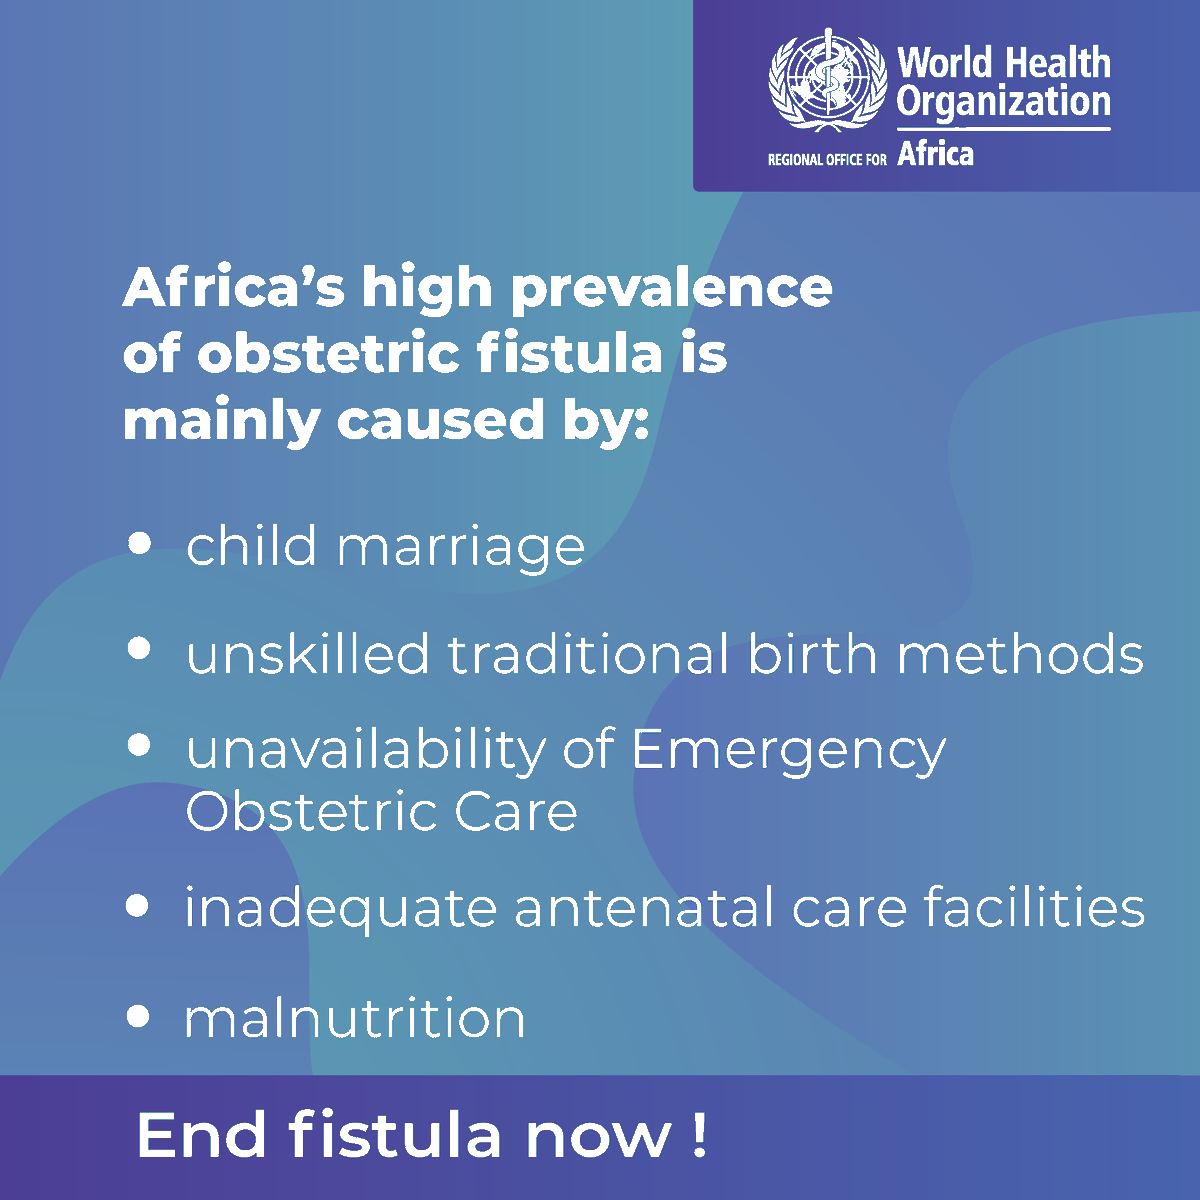 Today is International Day to End Obstetric Fistula! 🤰🏿 
An estimated 2 million women around the world suffer from this preventable and treatable condition.  

By addressing Obstetric Fistula, we can improve maternal health and advance the #SDGs.  
#EndFistula